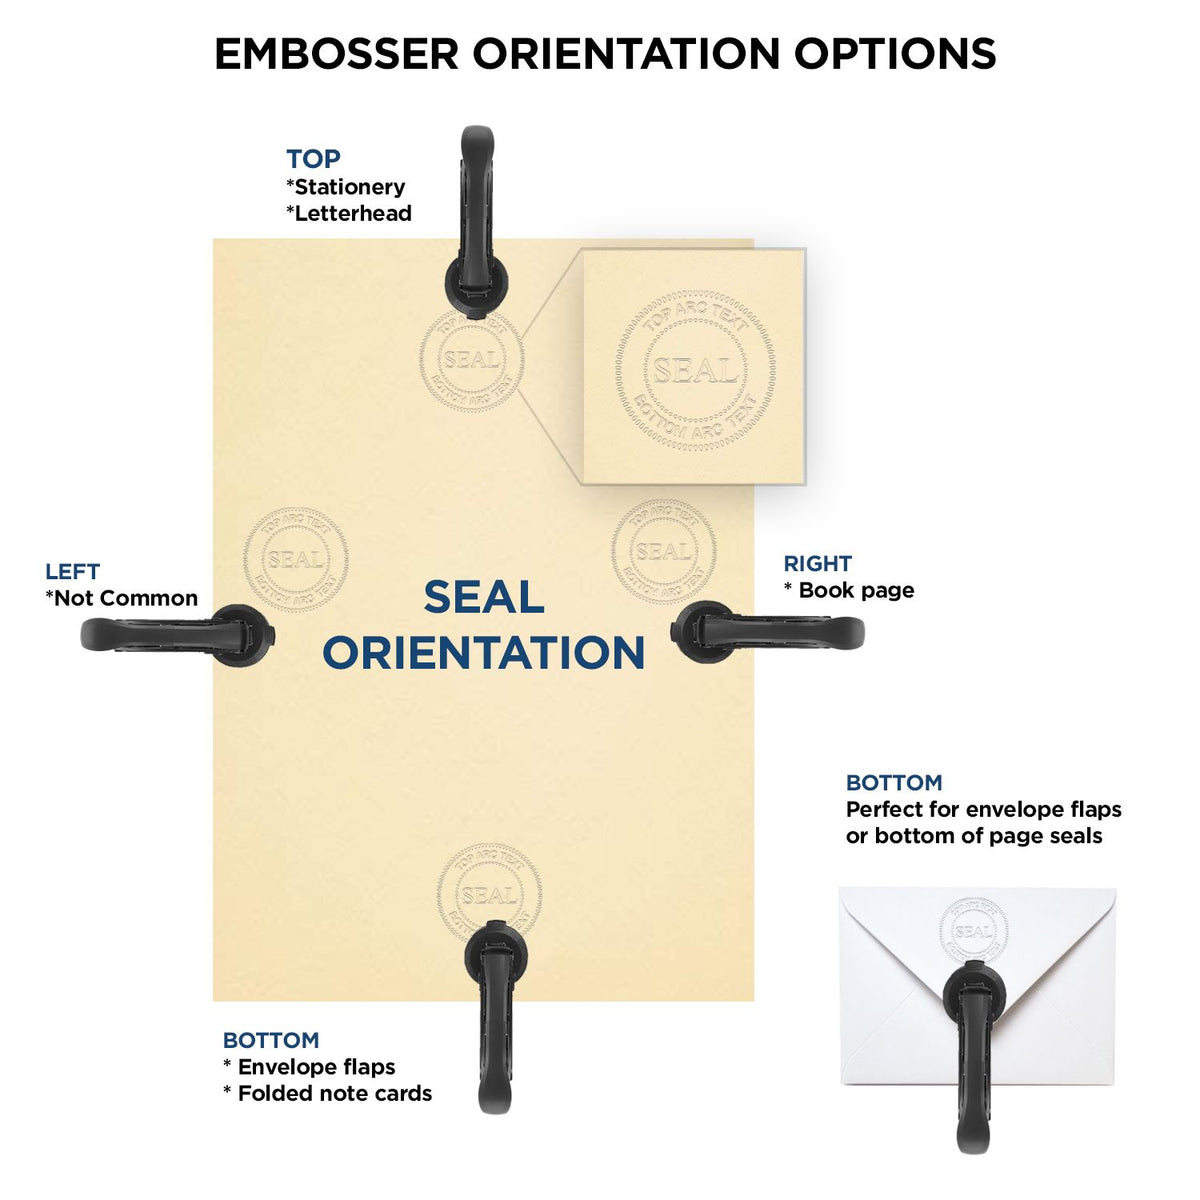 An infographic for the Handheld Connecticut Professional Geologist Embosser showing embosser orientation, this is showing examples of a top, bottom, right and left insert.